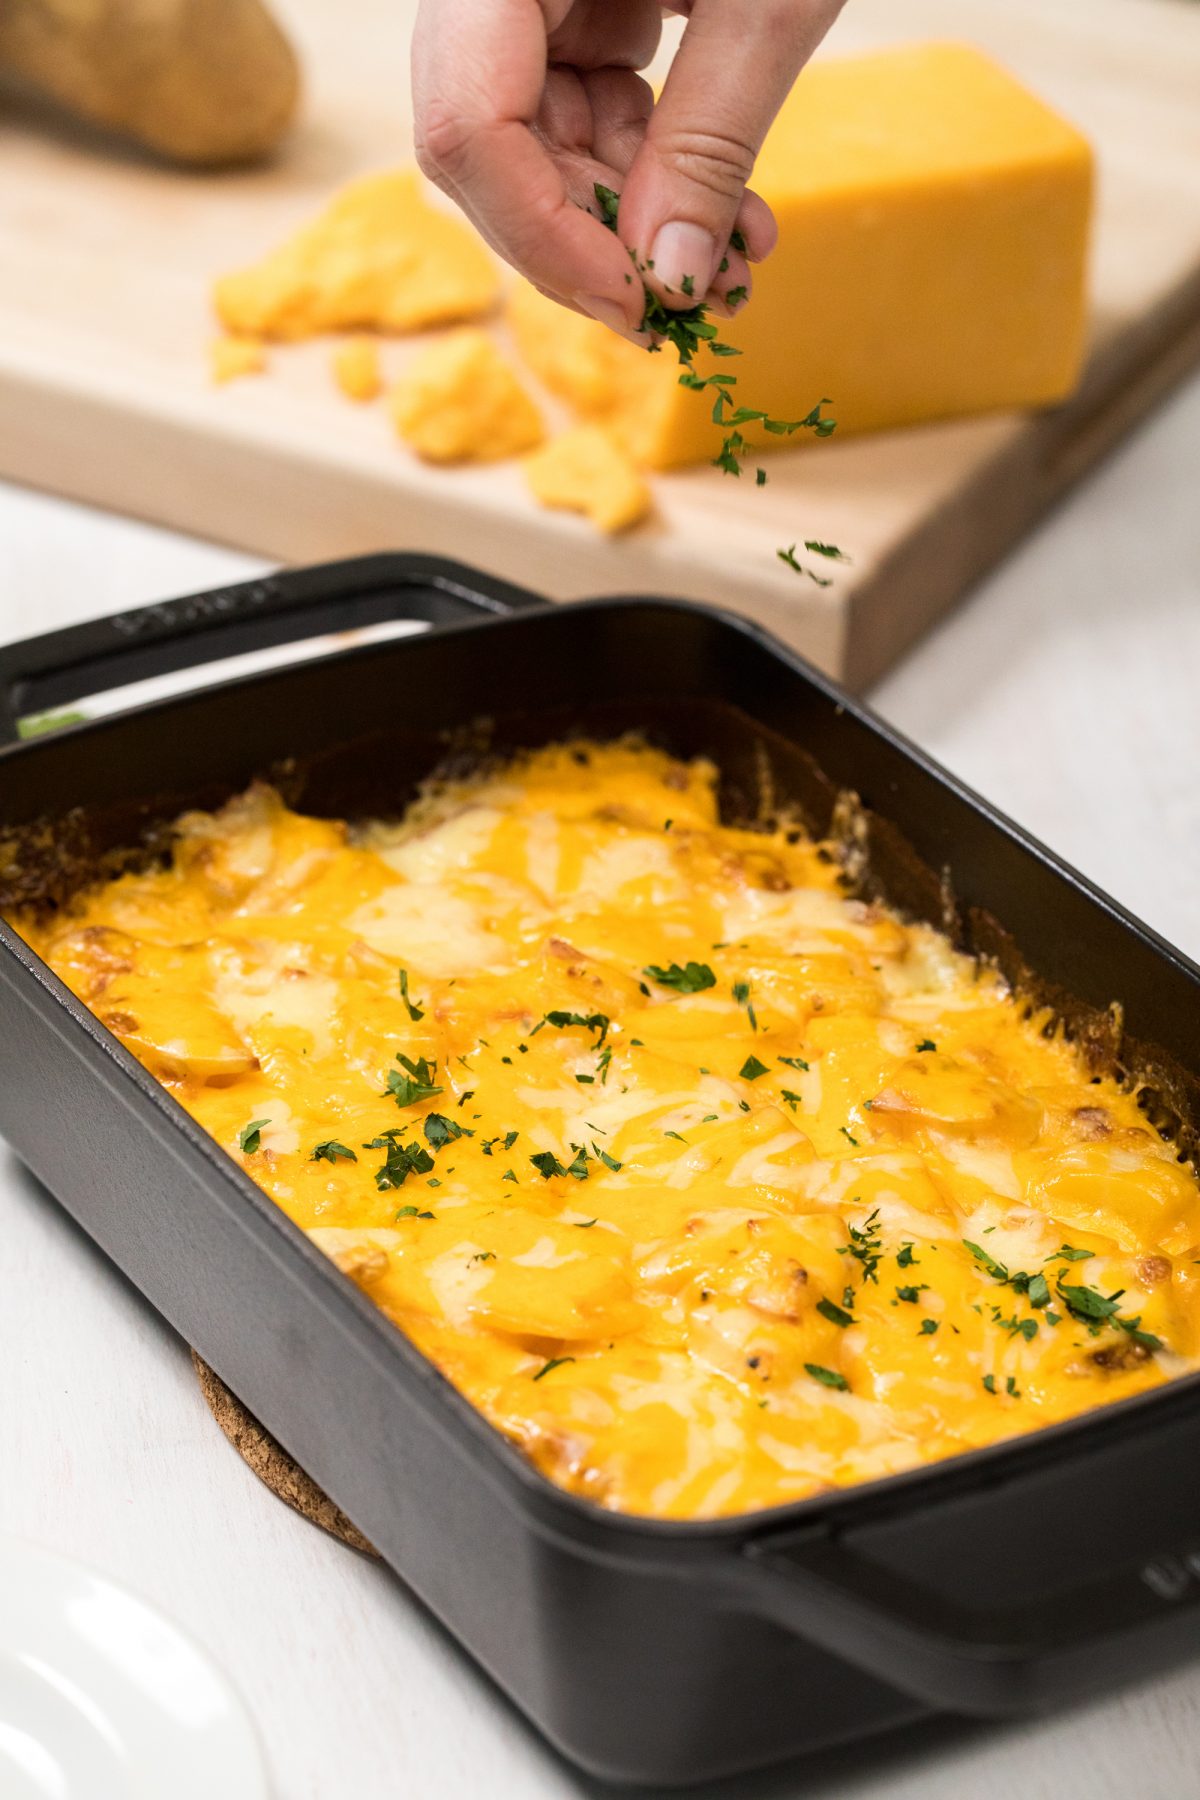 Potatoes and cheese